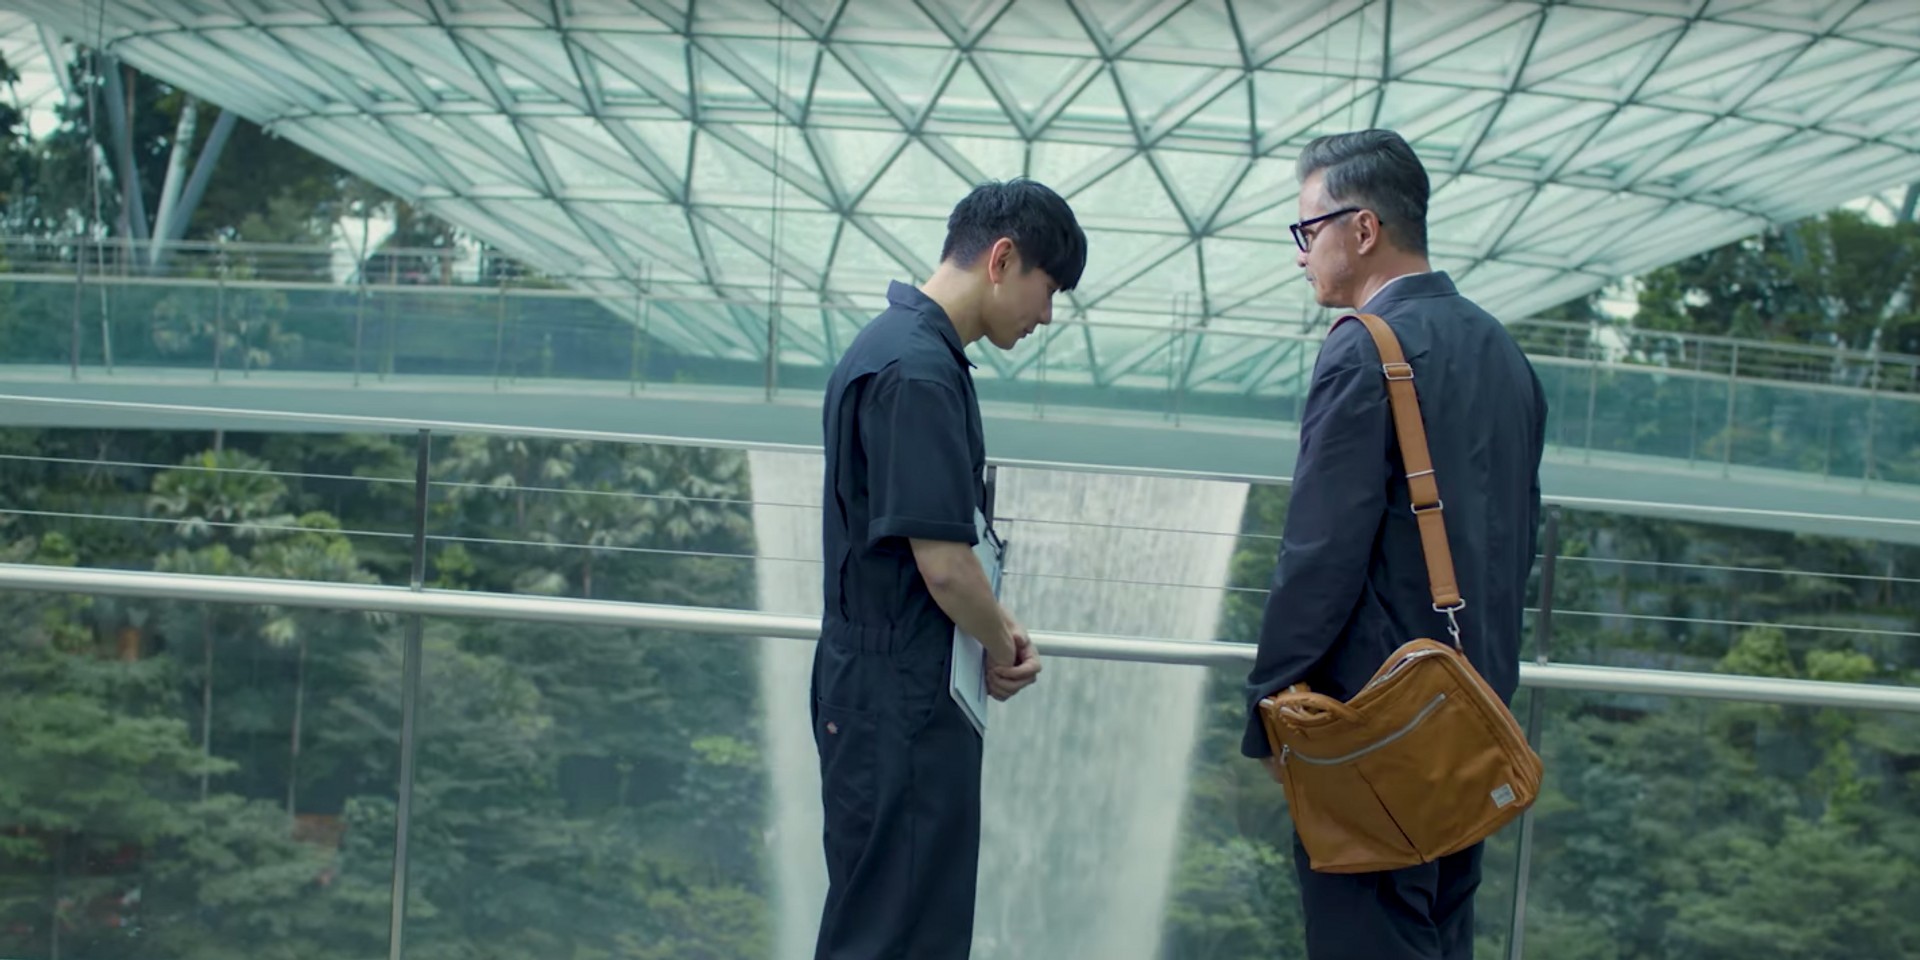 JJ Lin shares enchanting new song inspired by Jewel Changi Airport’s HSBC Rain Vortex – watch